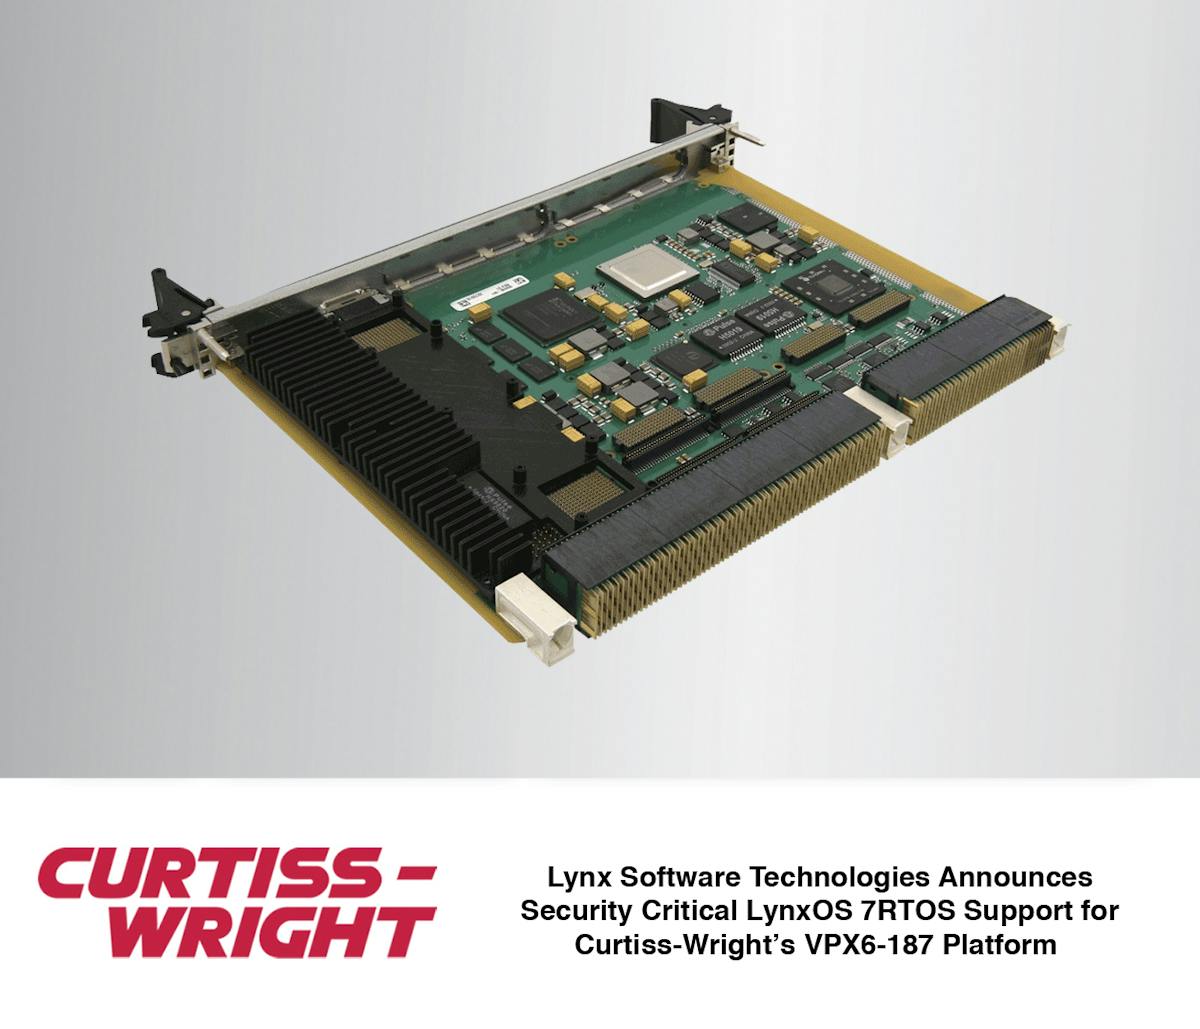 Curtiss-Wright VPX6-187 ruggedized single-board computer now offer COTS development and deployment platform for latest version of LynxOS